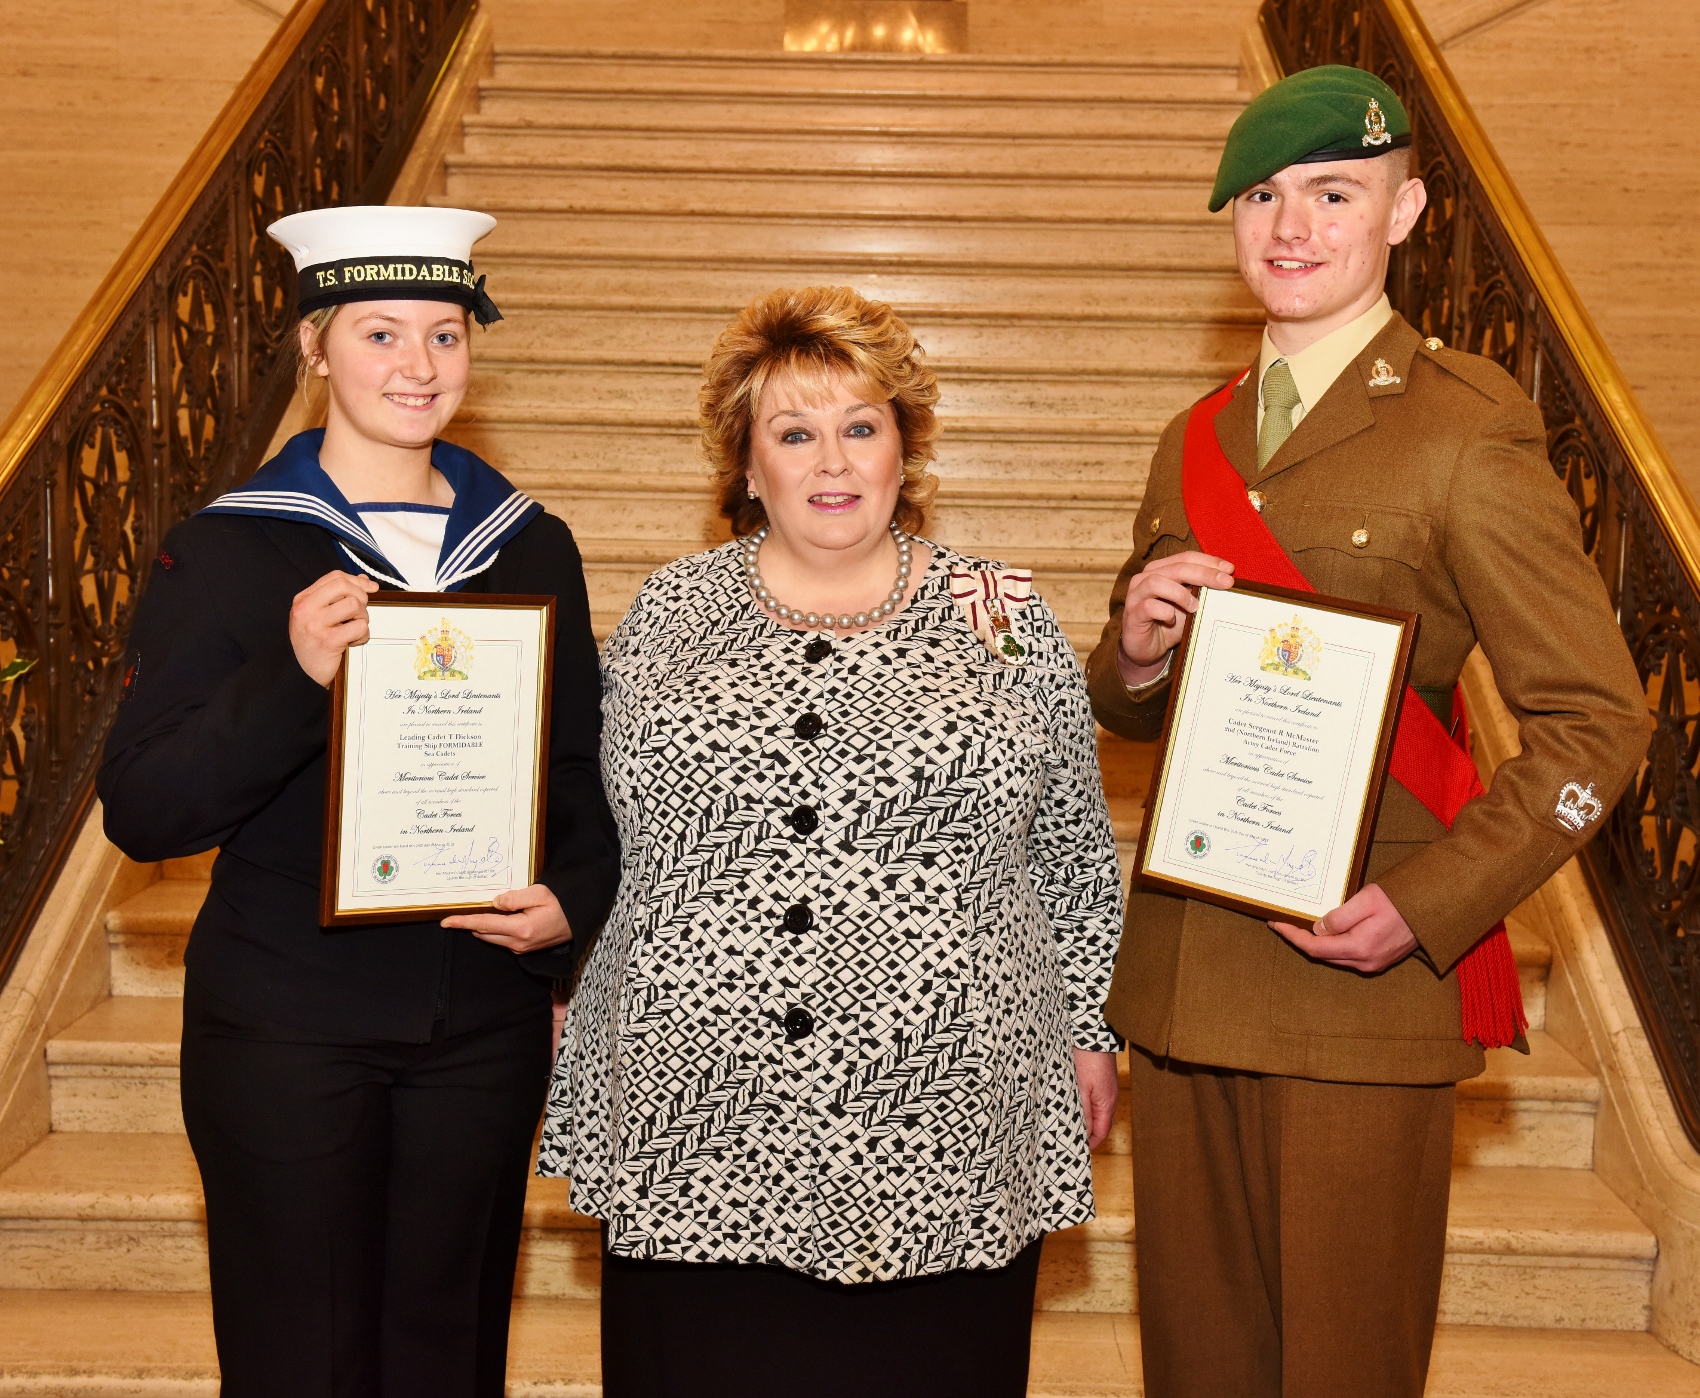 At a presentation in Stormont in March 2018, Leading Sea Cadet Toni Dixon and Cadet Sgt Major Ryan McMaster were commissioned as the Lord Lieutenant’s cadets for 2018/19. Pictured with the Lord Lieutenant Mrs Fionnuala Jay-O’Boyle